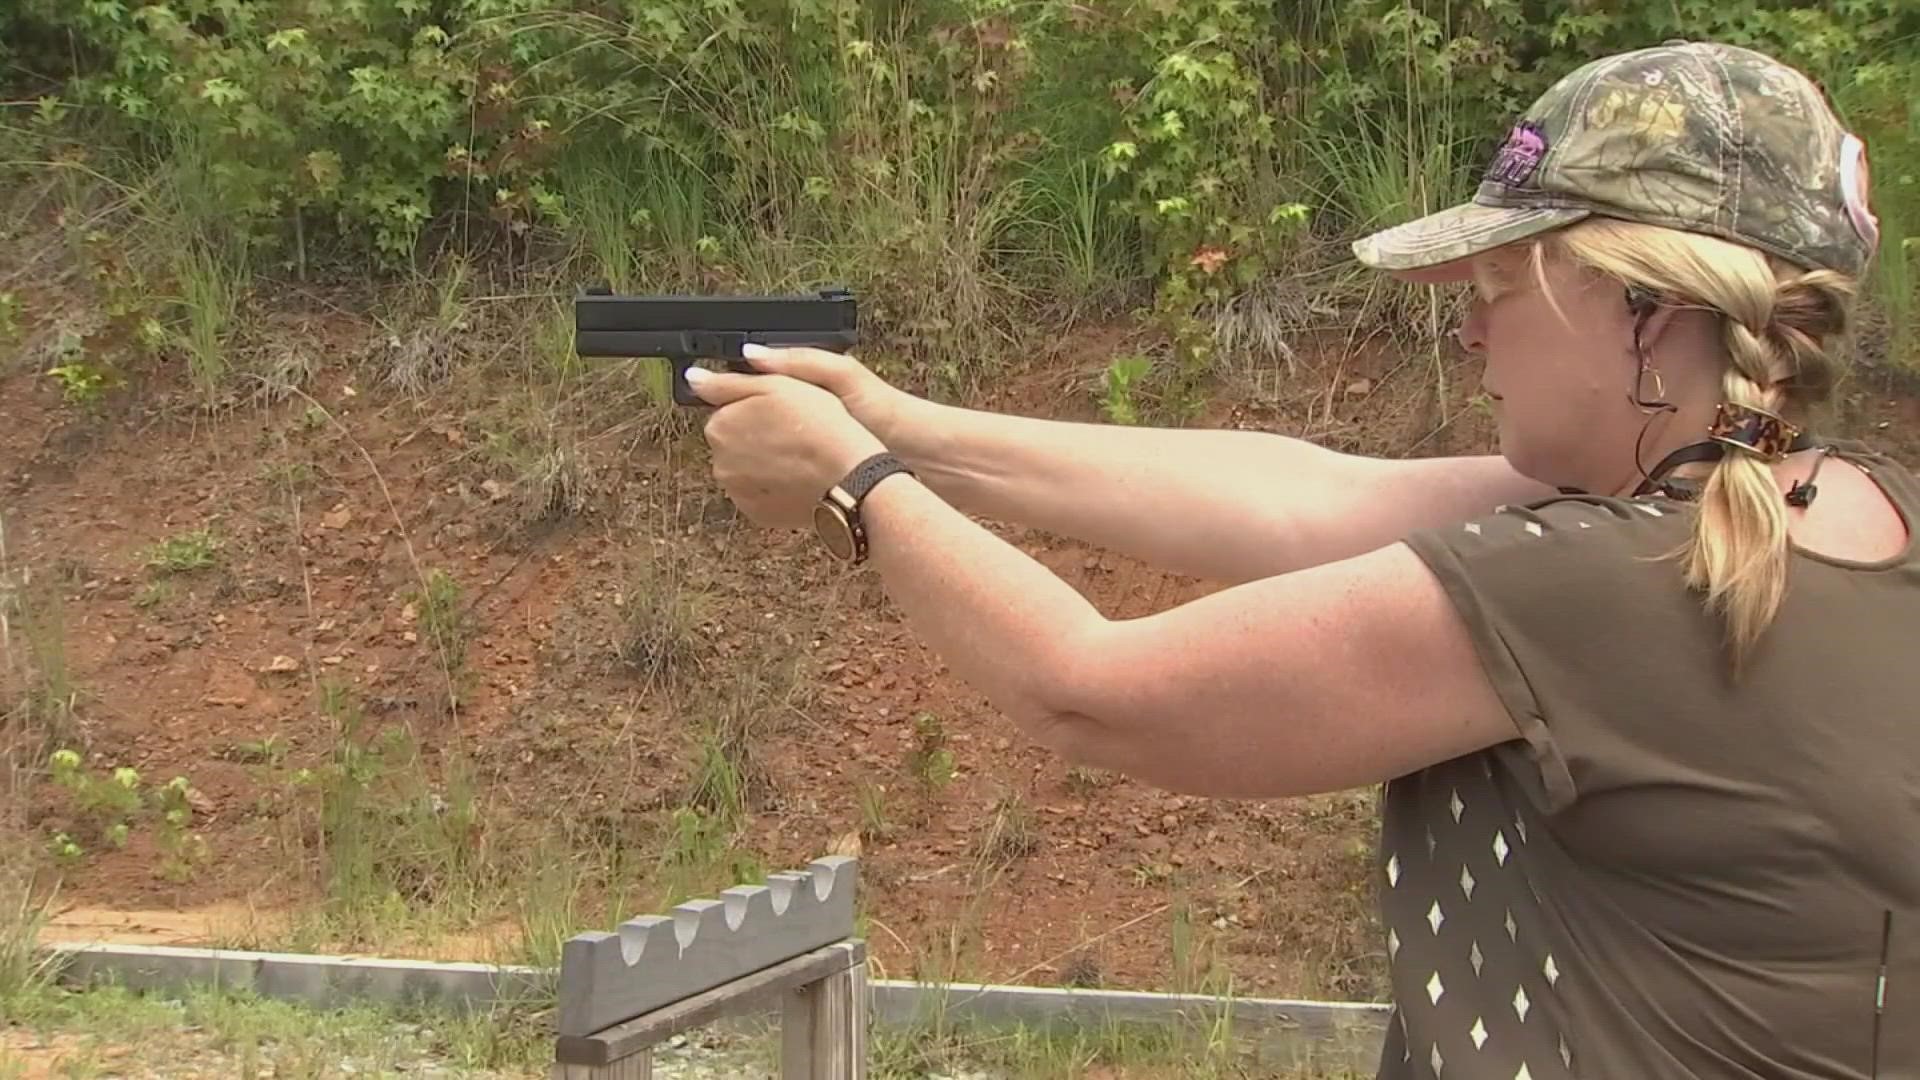 The bill comes after the state lost a lawsuit deeming it 'unconstitutional' to prevent 18-year-olds from carrying since they can legally buy a gun at 18.